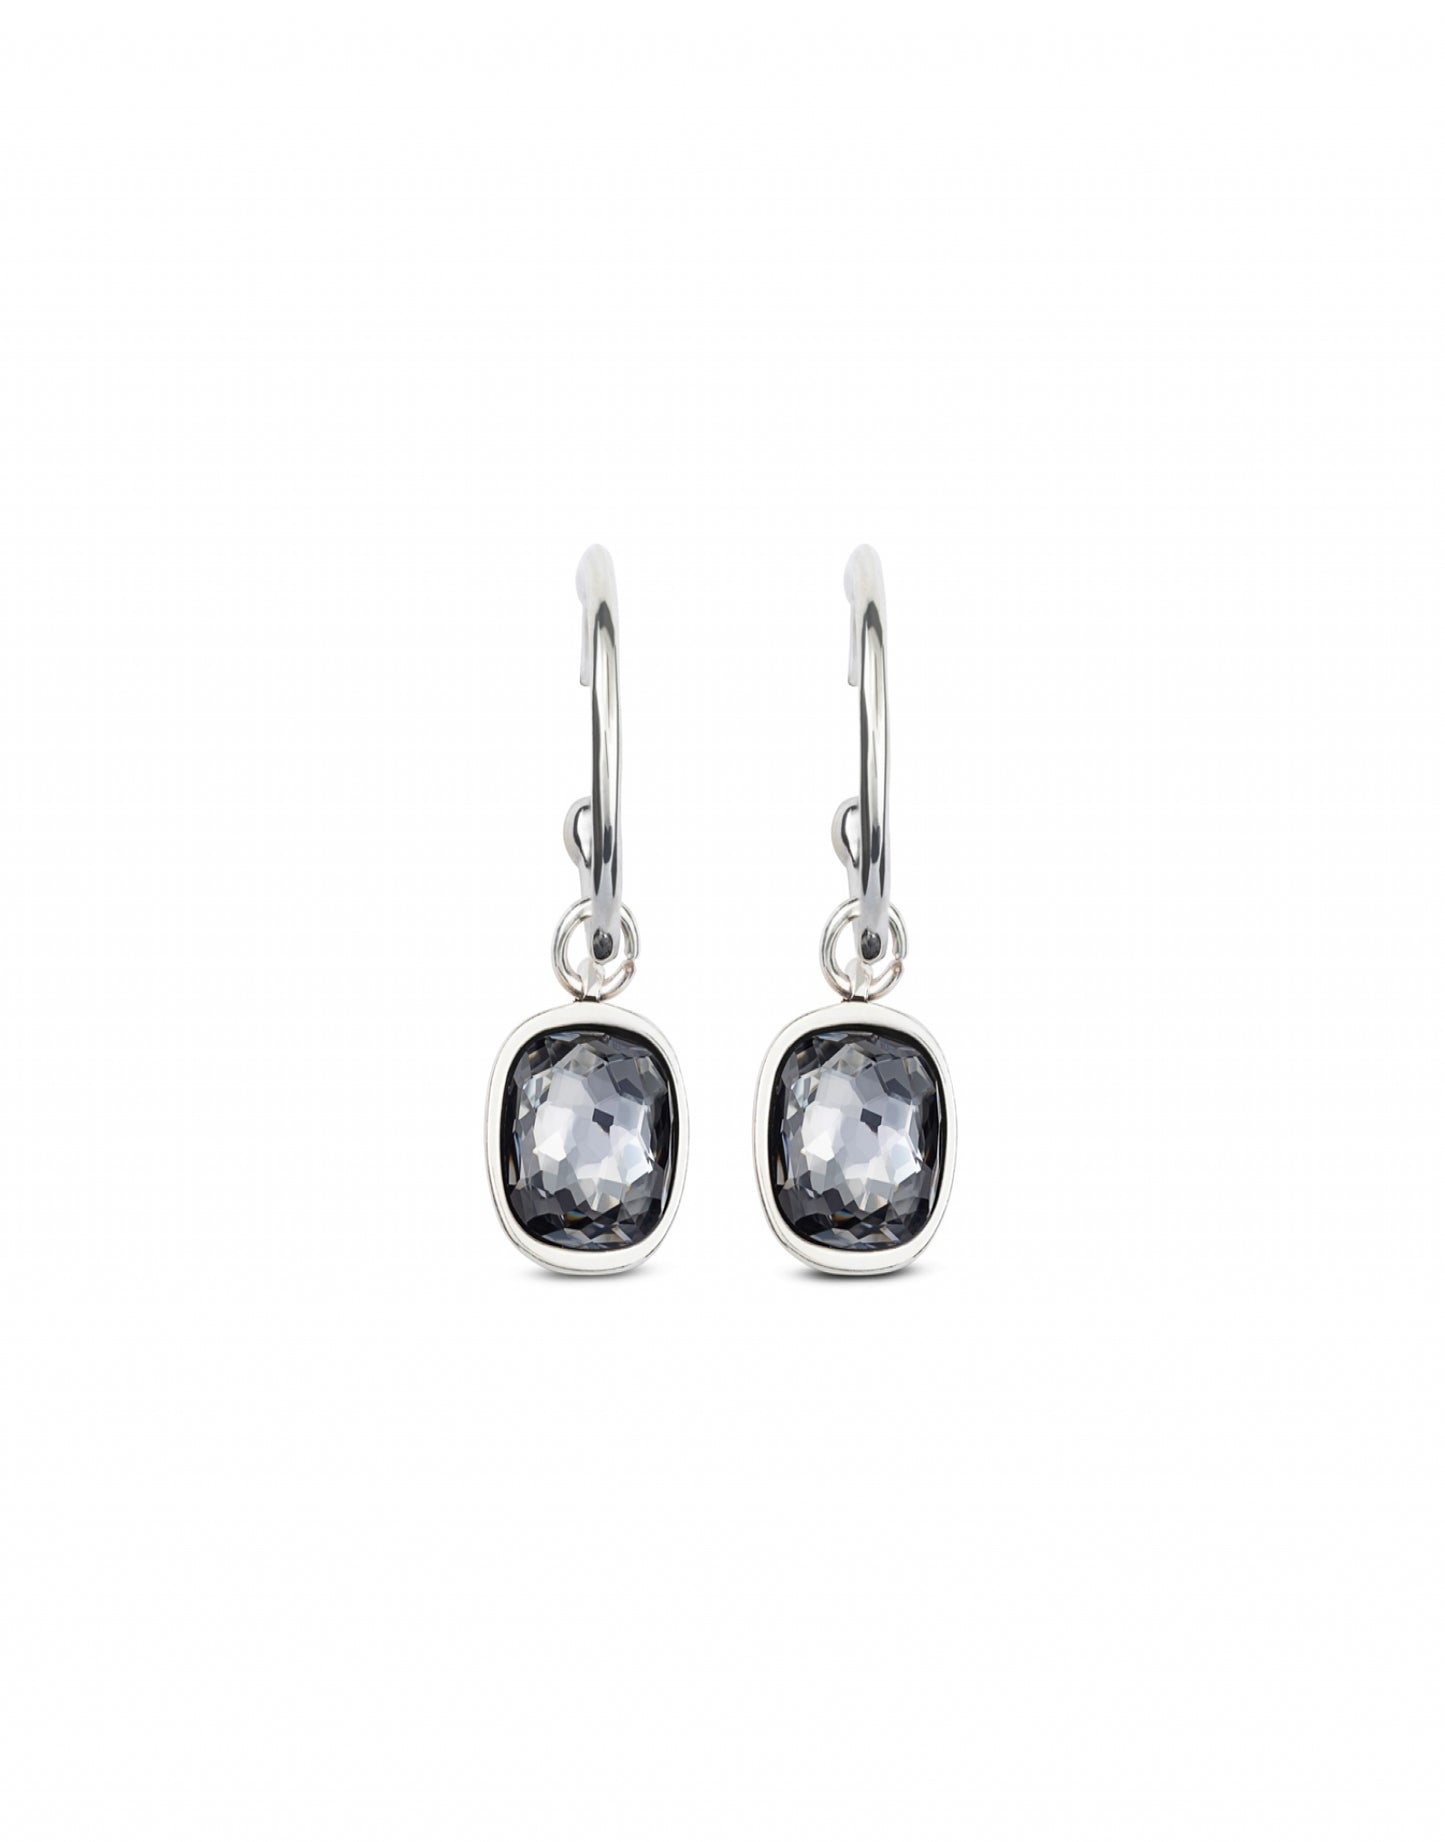 UNO DE 50 UNOde50 - Silver Shiny Tears Earrings available at The Good Life Boutique